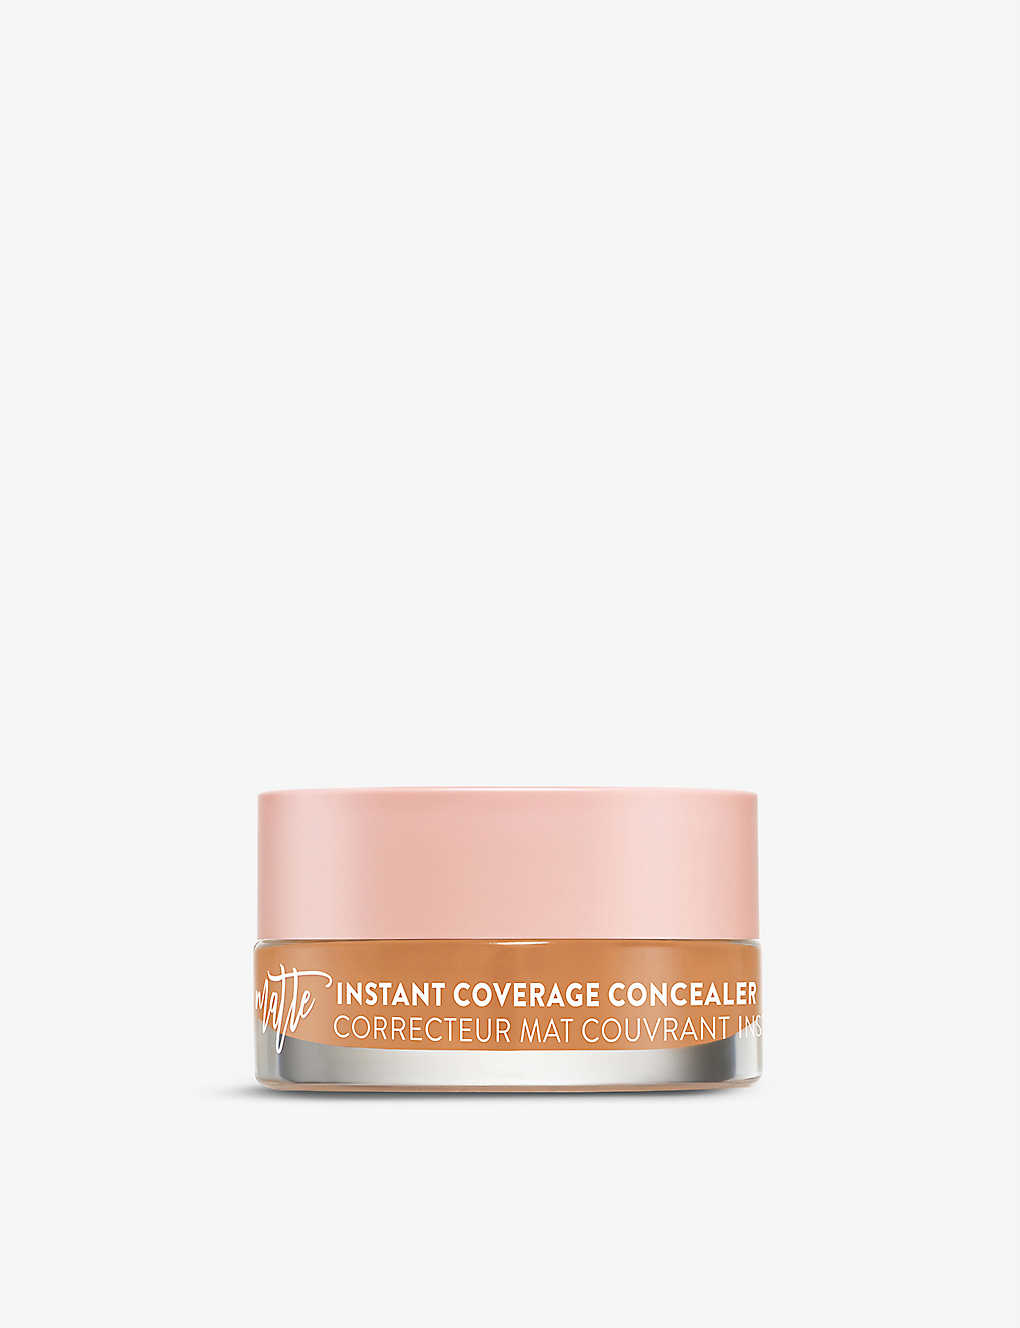 Too Faced Peach Perfect Instant Coverage Concealer 7g In Toasted